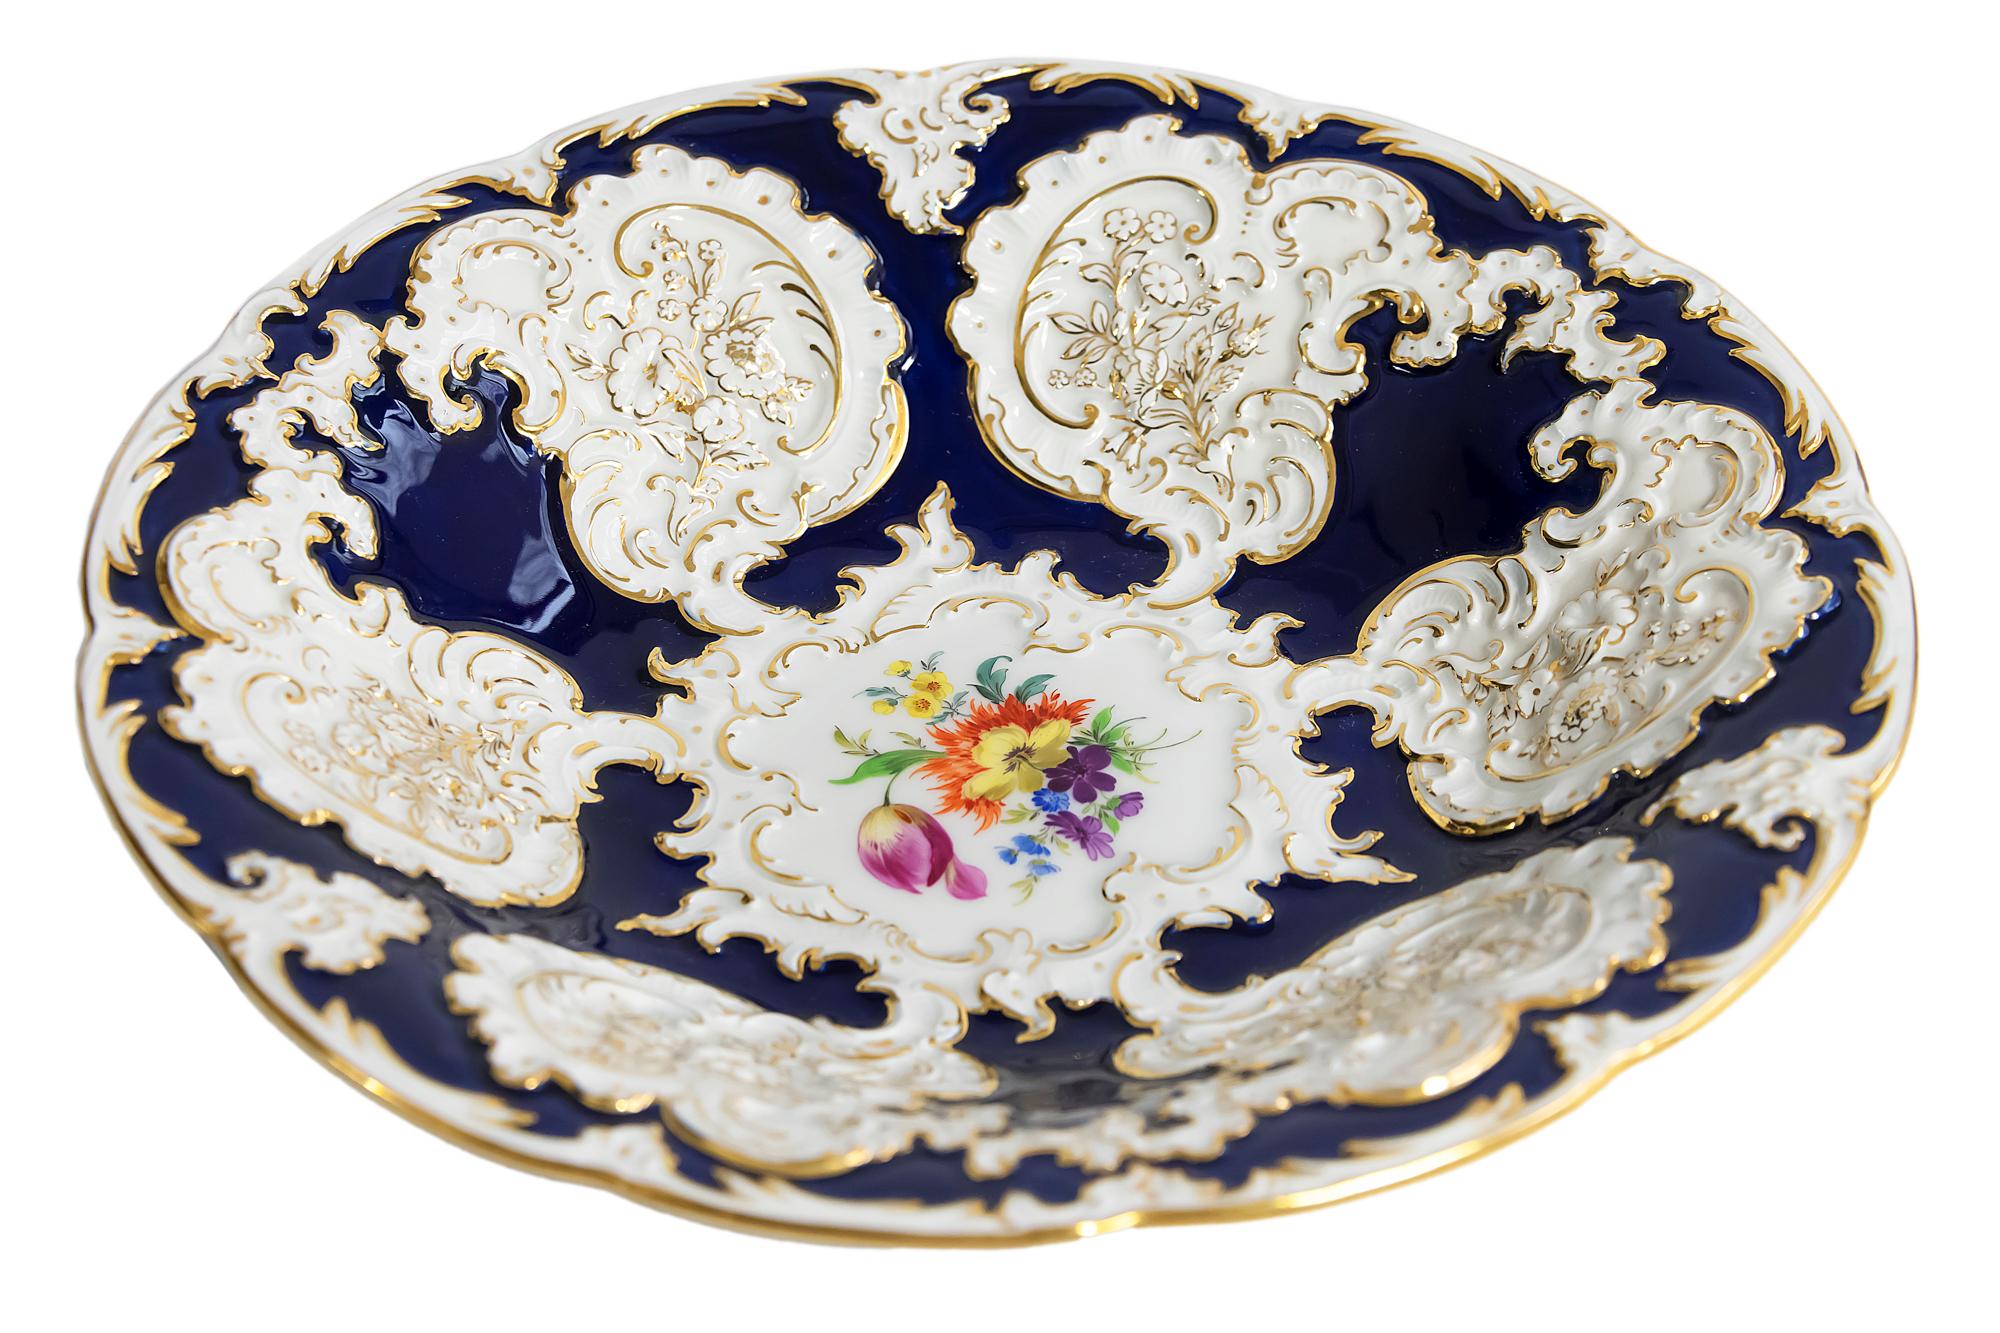 Meissen porcelain deep cabinet plate/bowl is cobalt blue color with gold decor and relief floral motives. It is hand painted with floral motives in the center.